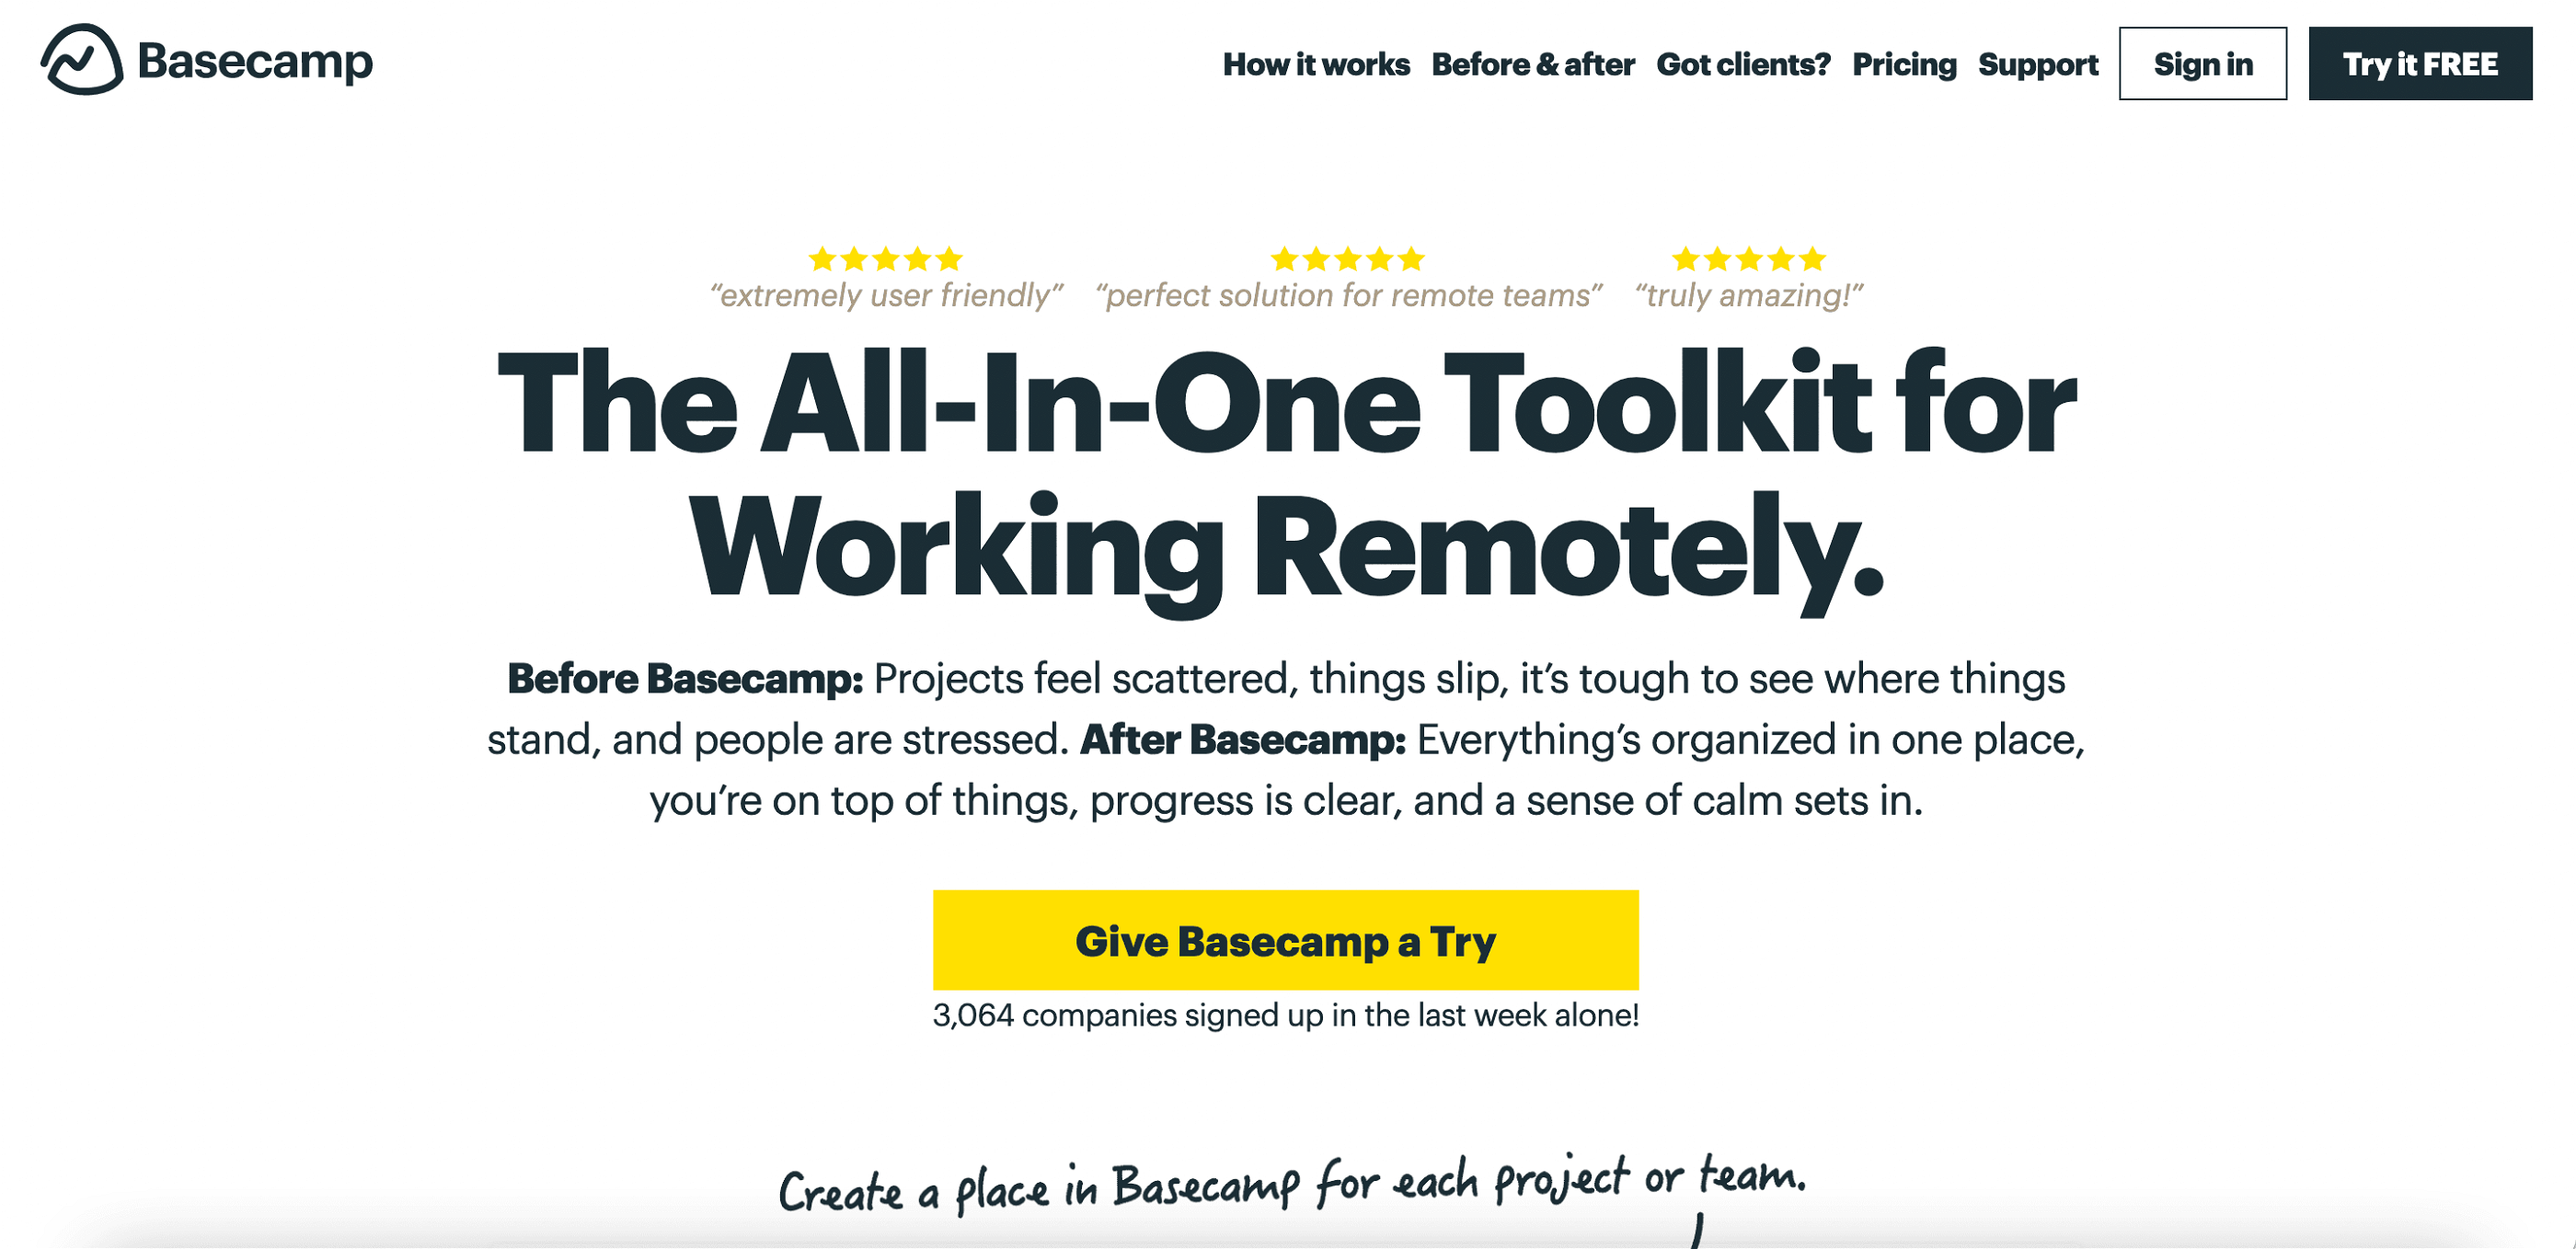 Basecamp, all-in-one toolkit